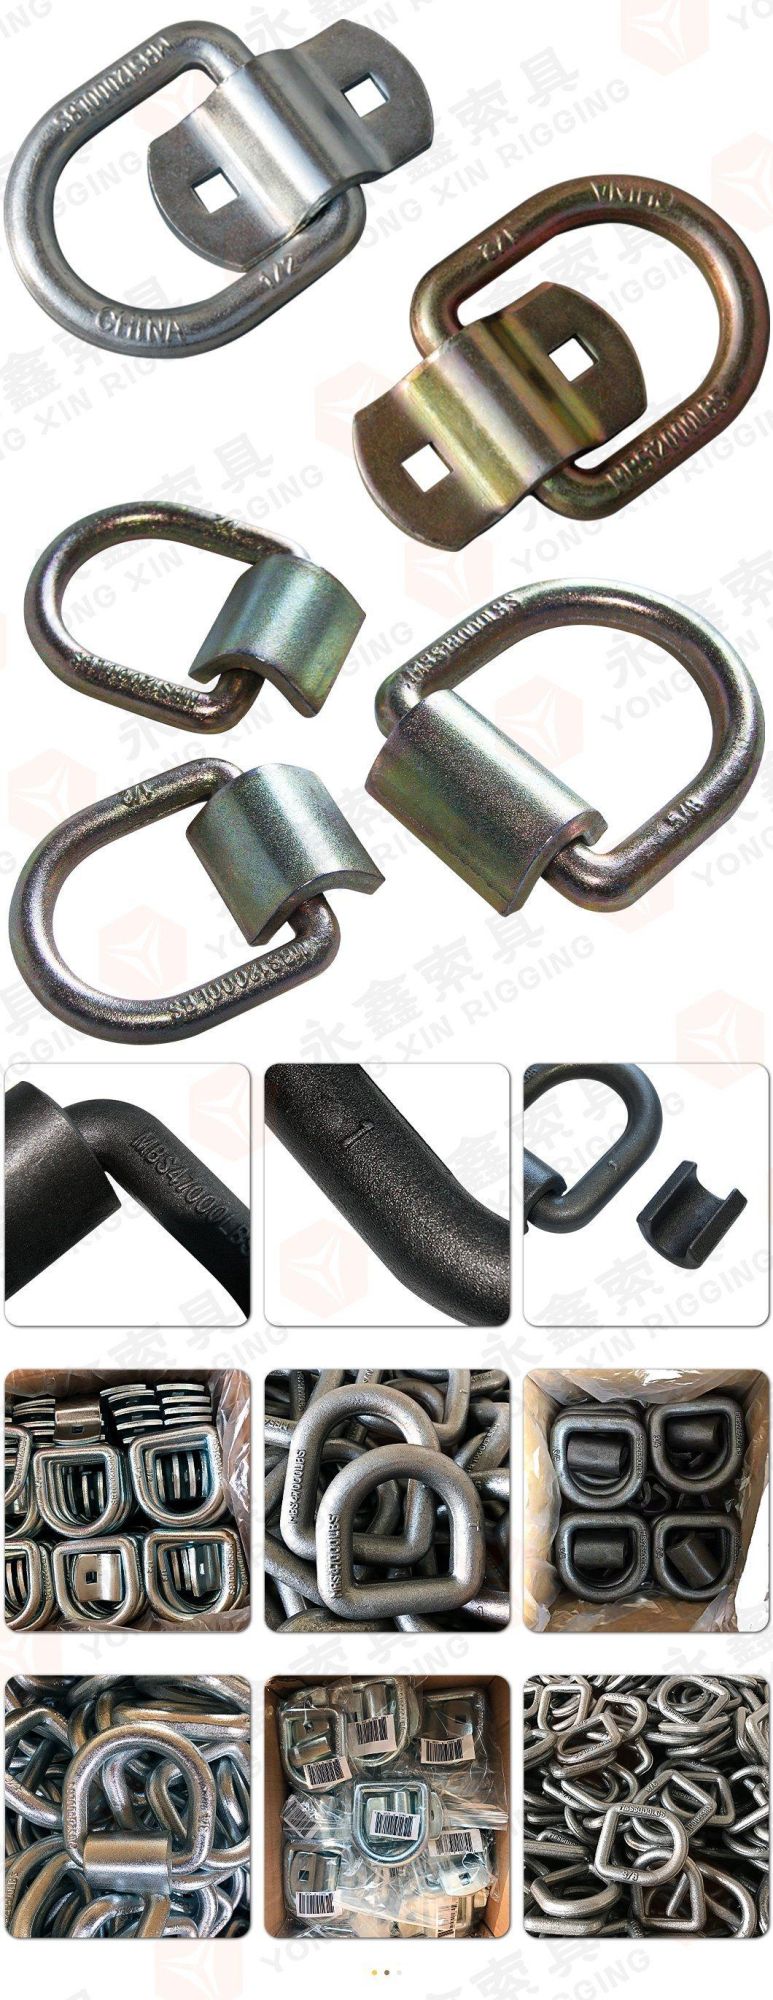 D Ring Tie Downs Heavy Duty Tie Down D- Rings Anchor Lashing Ring with Mounting Bracket for Loads on Boatstrailerstrucks